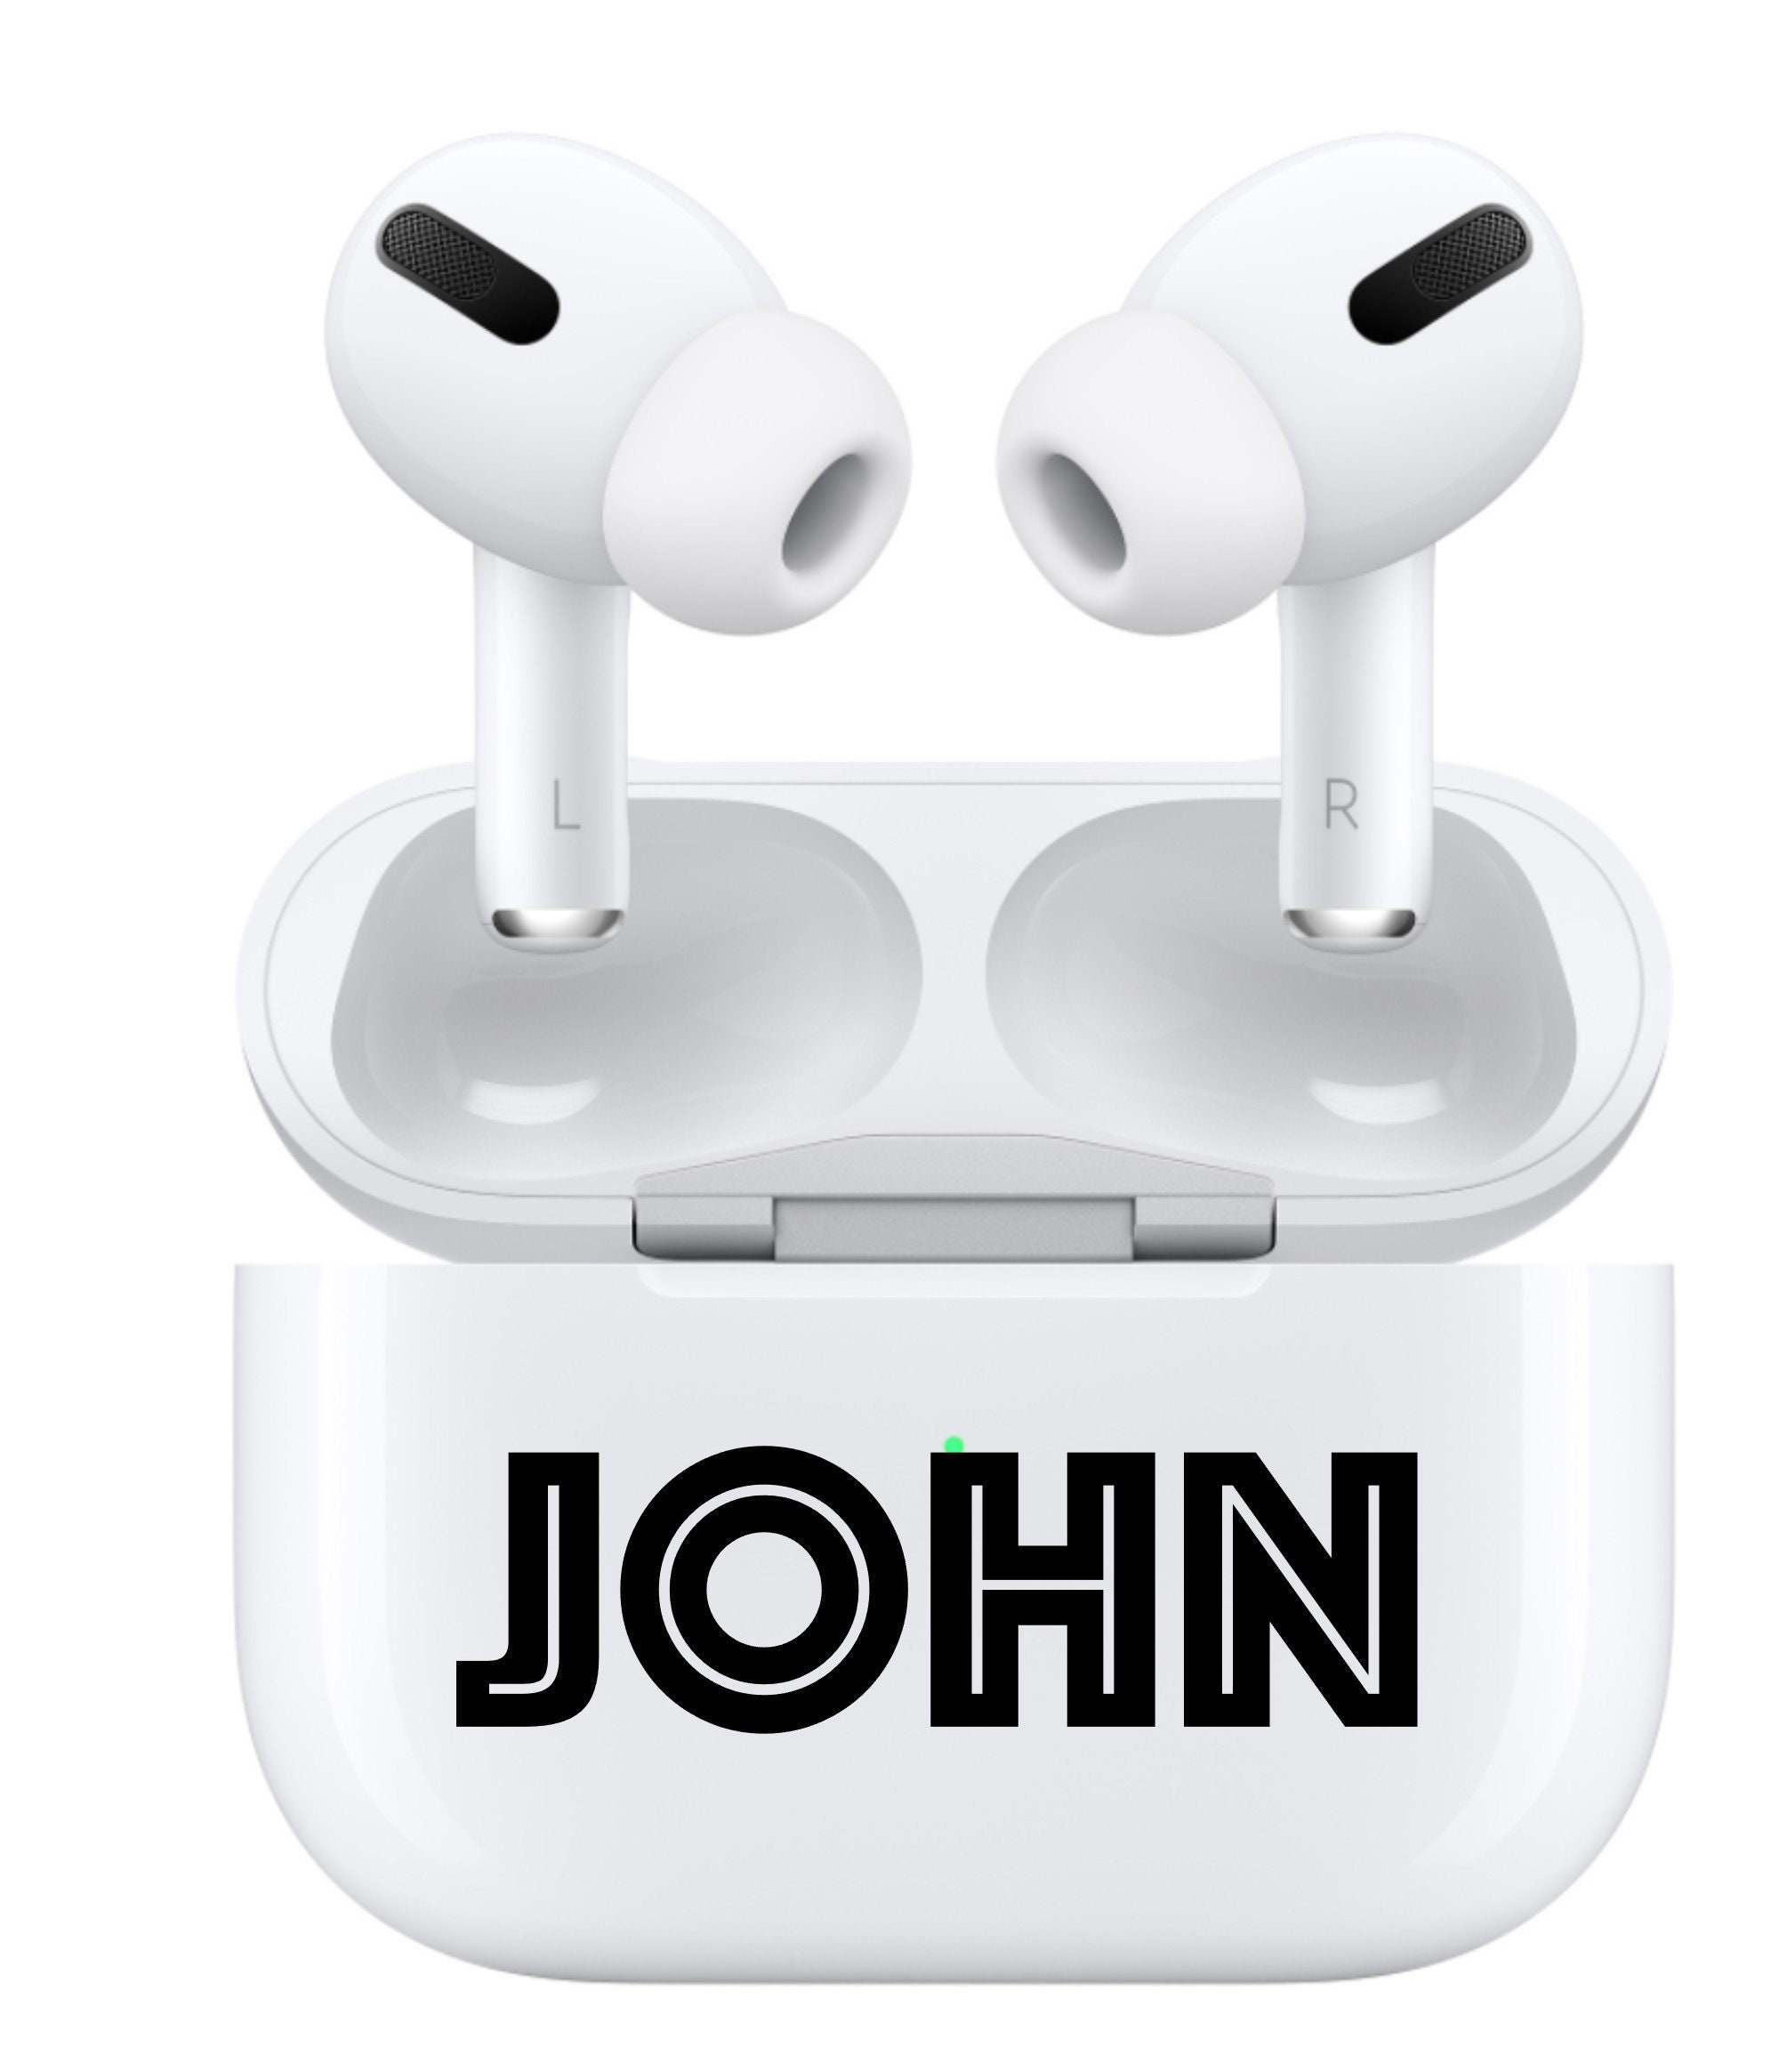 Airpods Pro Block Name Decal Airpods Name Decal Airpods Pro - Etsy